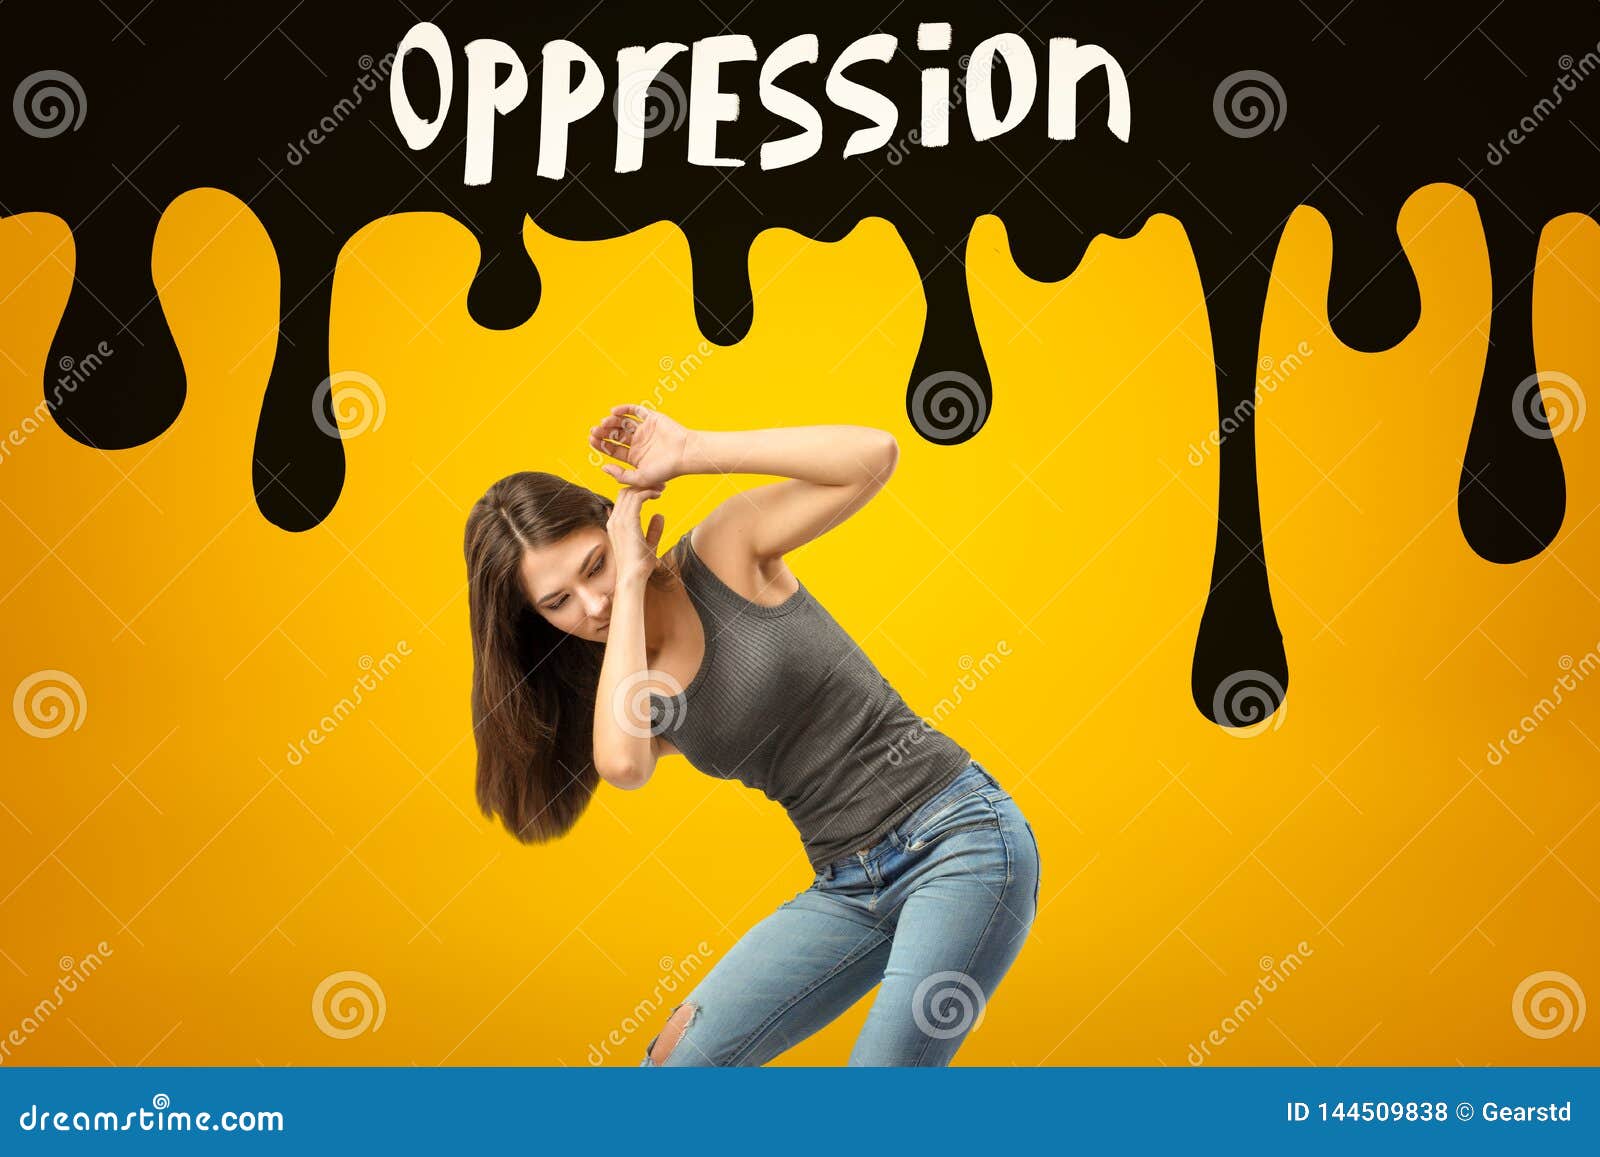 young brunette girl wearing casual jeans and t-shirt protecting herself with hands from black oppression sign on yellow